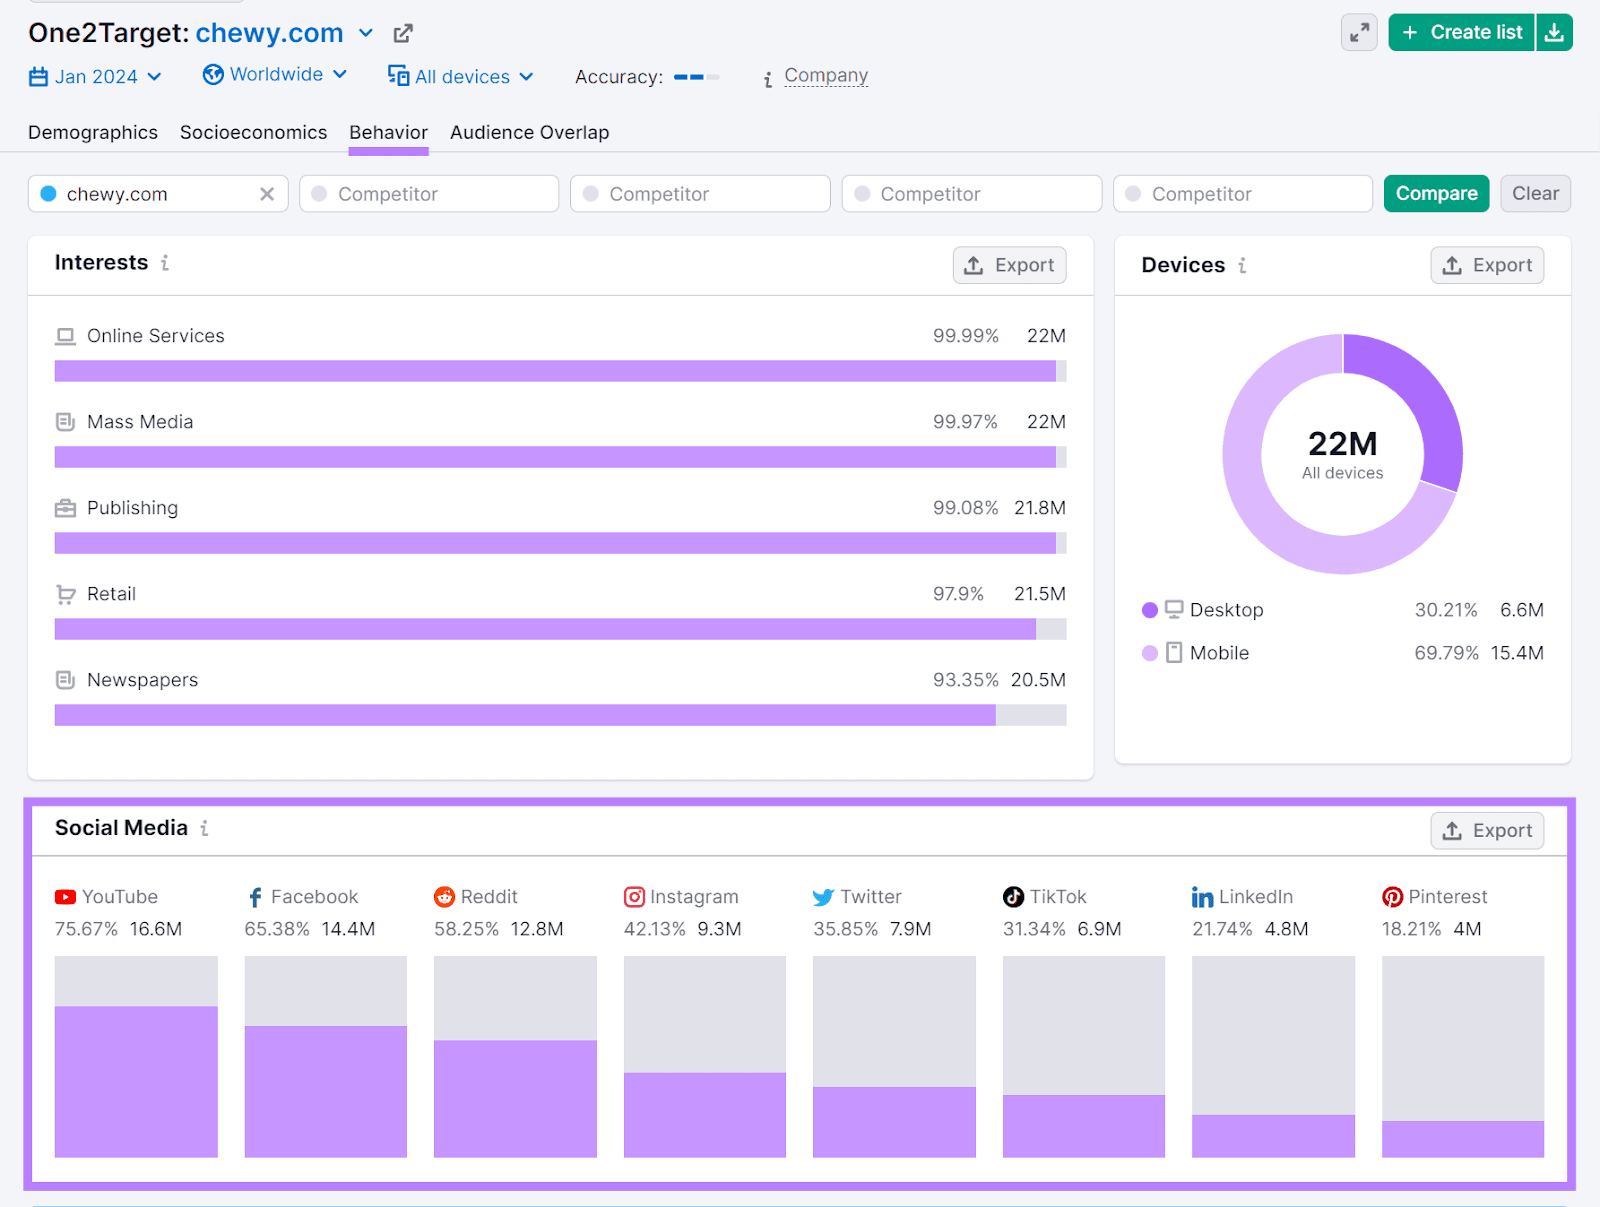 "Behavior" dashboard in One2Target tool, showing audience's interests, devices, and social media usage